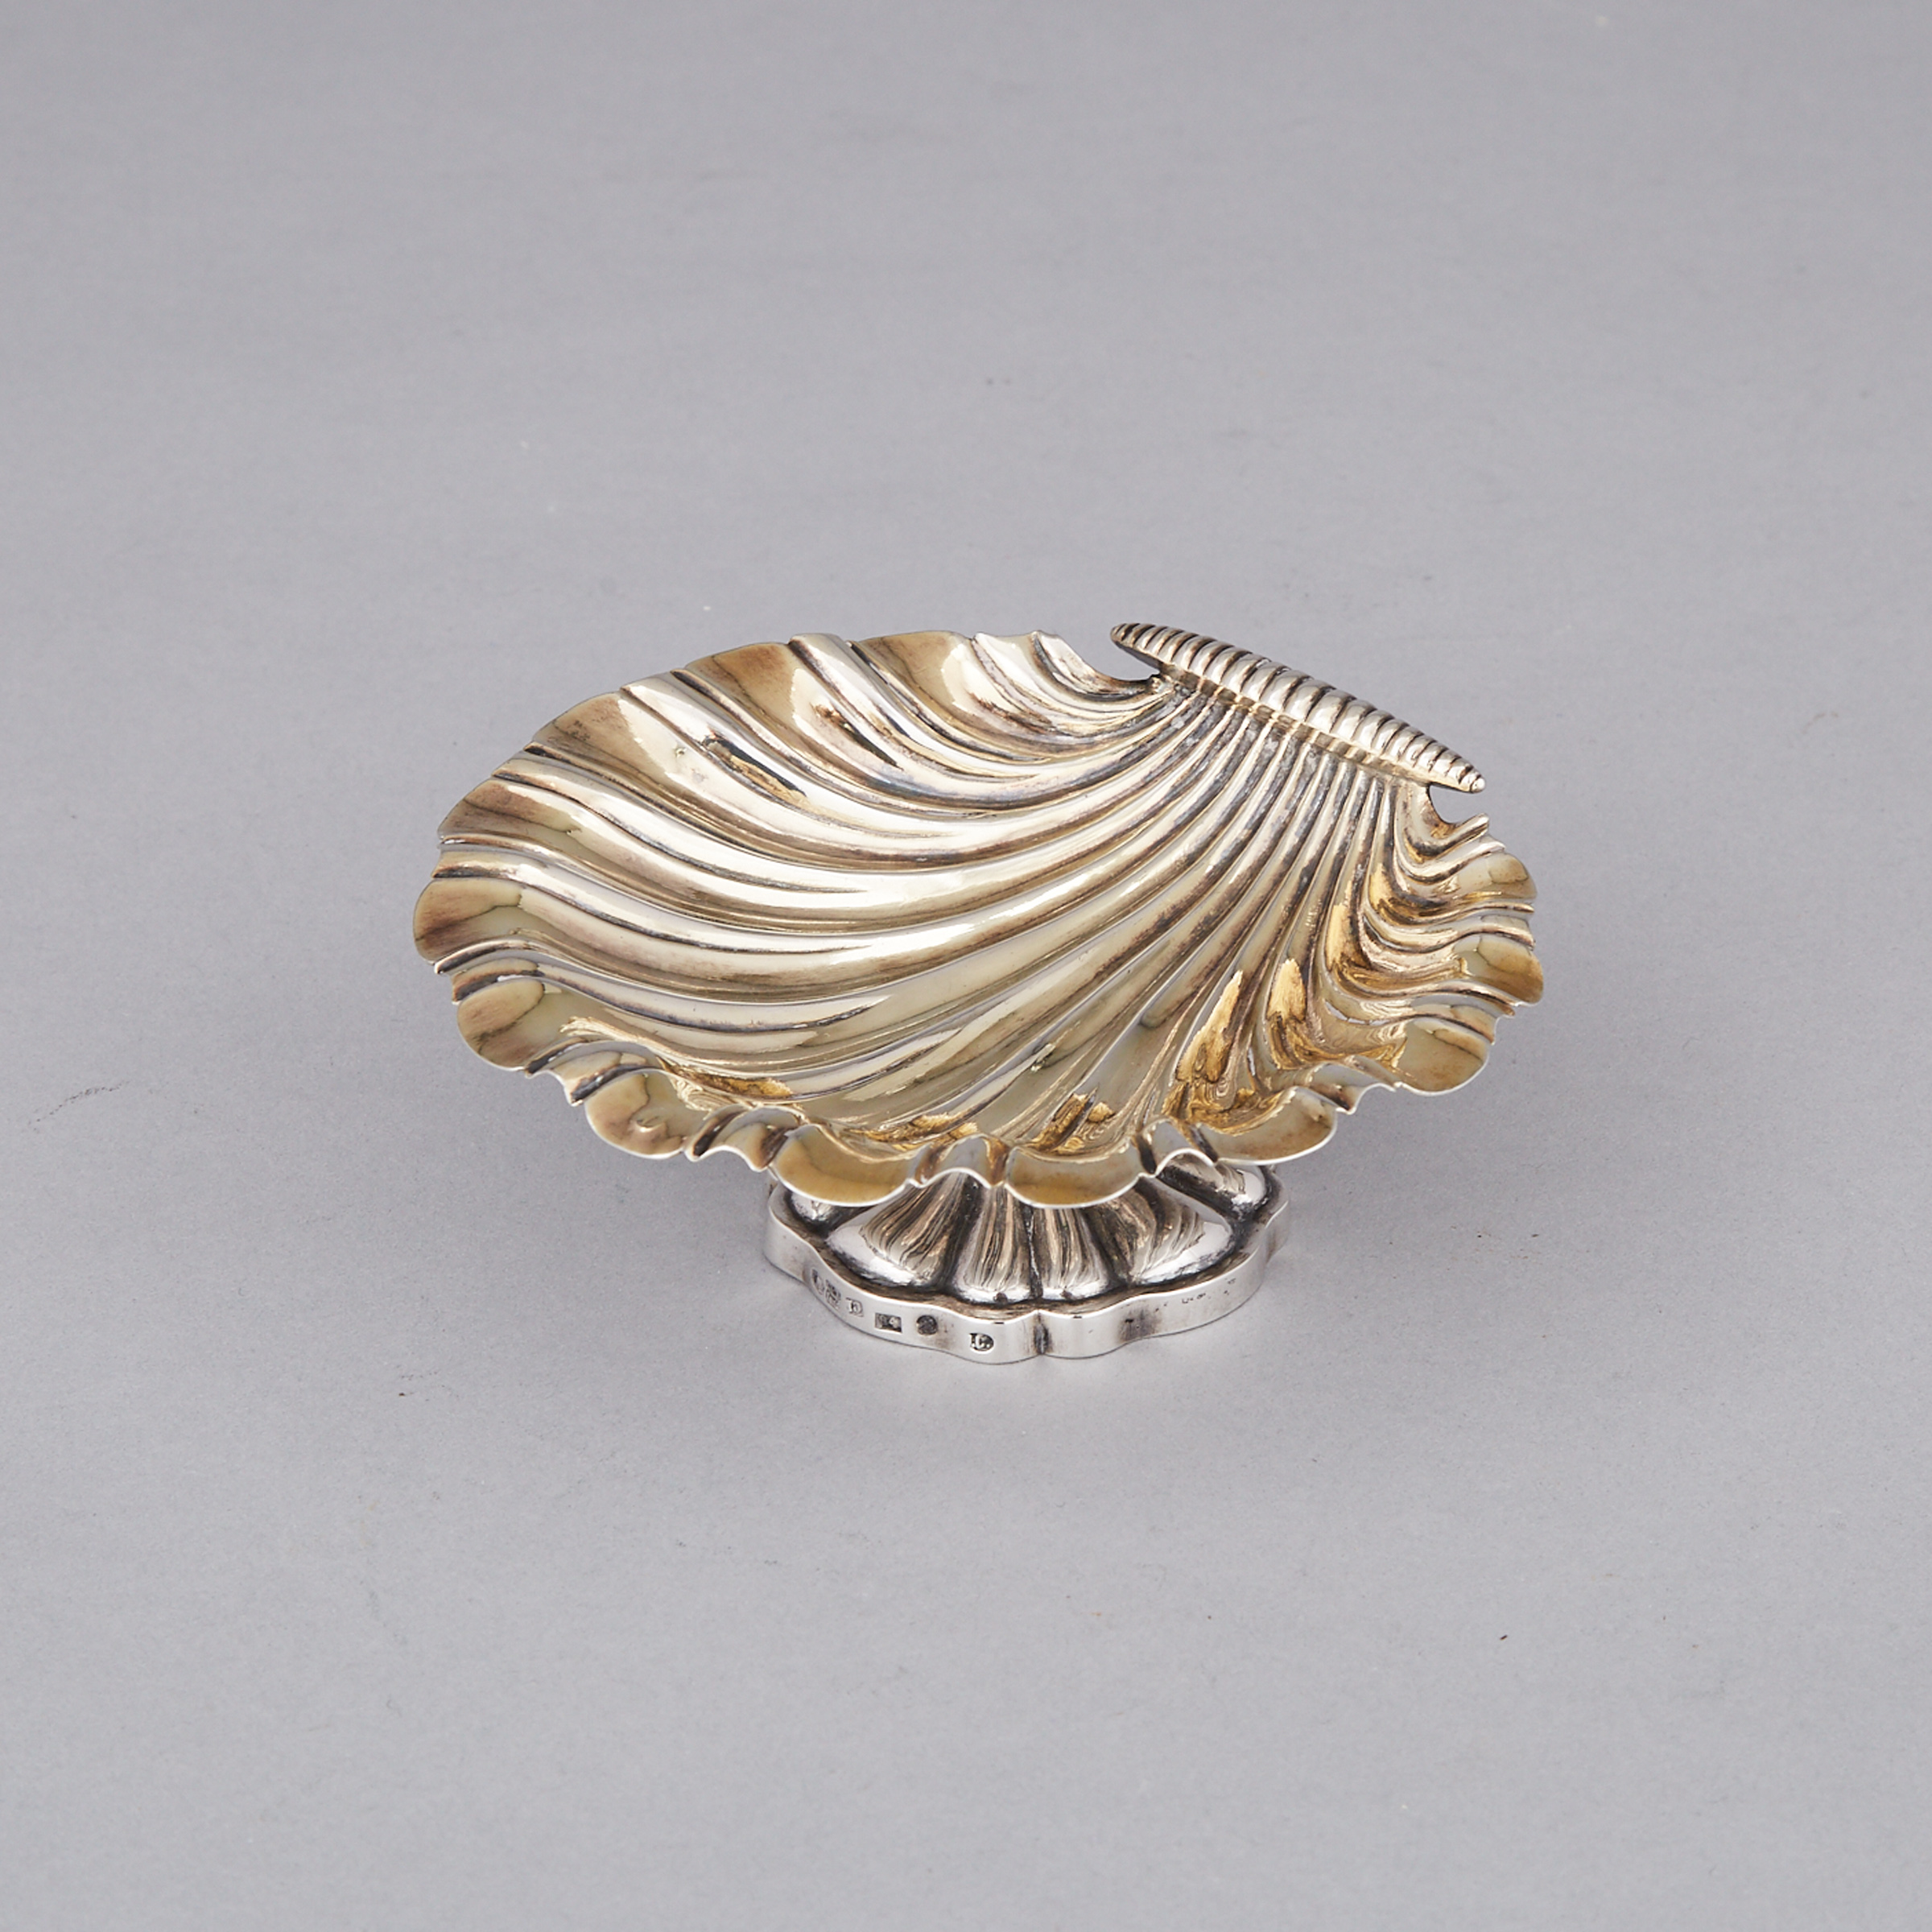 Russian Silver Parcel-Gilt Pedestal Footed Shell Dish, St. Petersburg, 1841